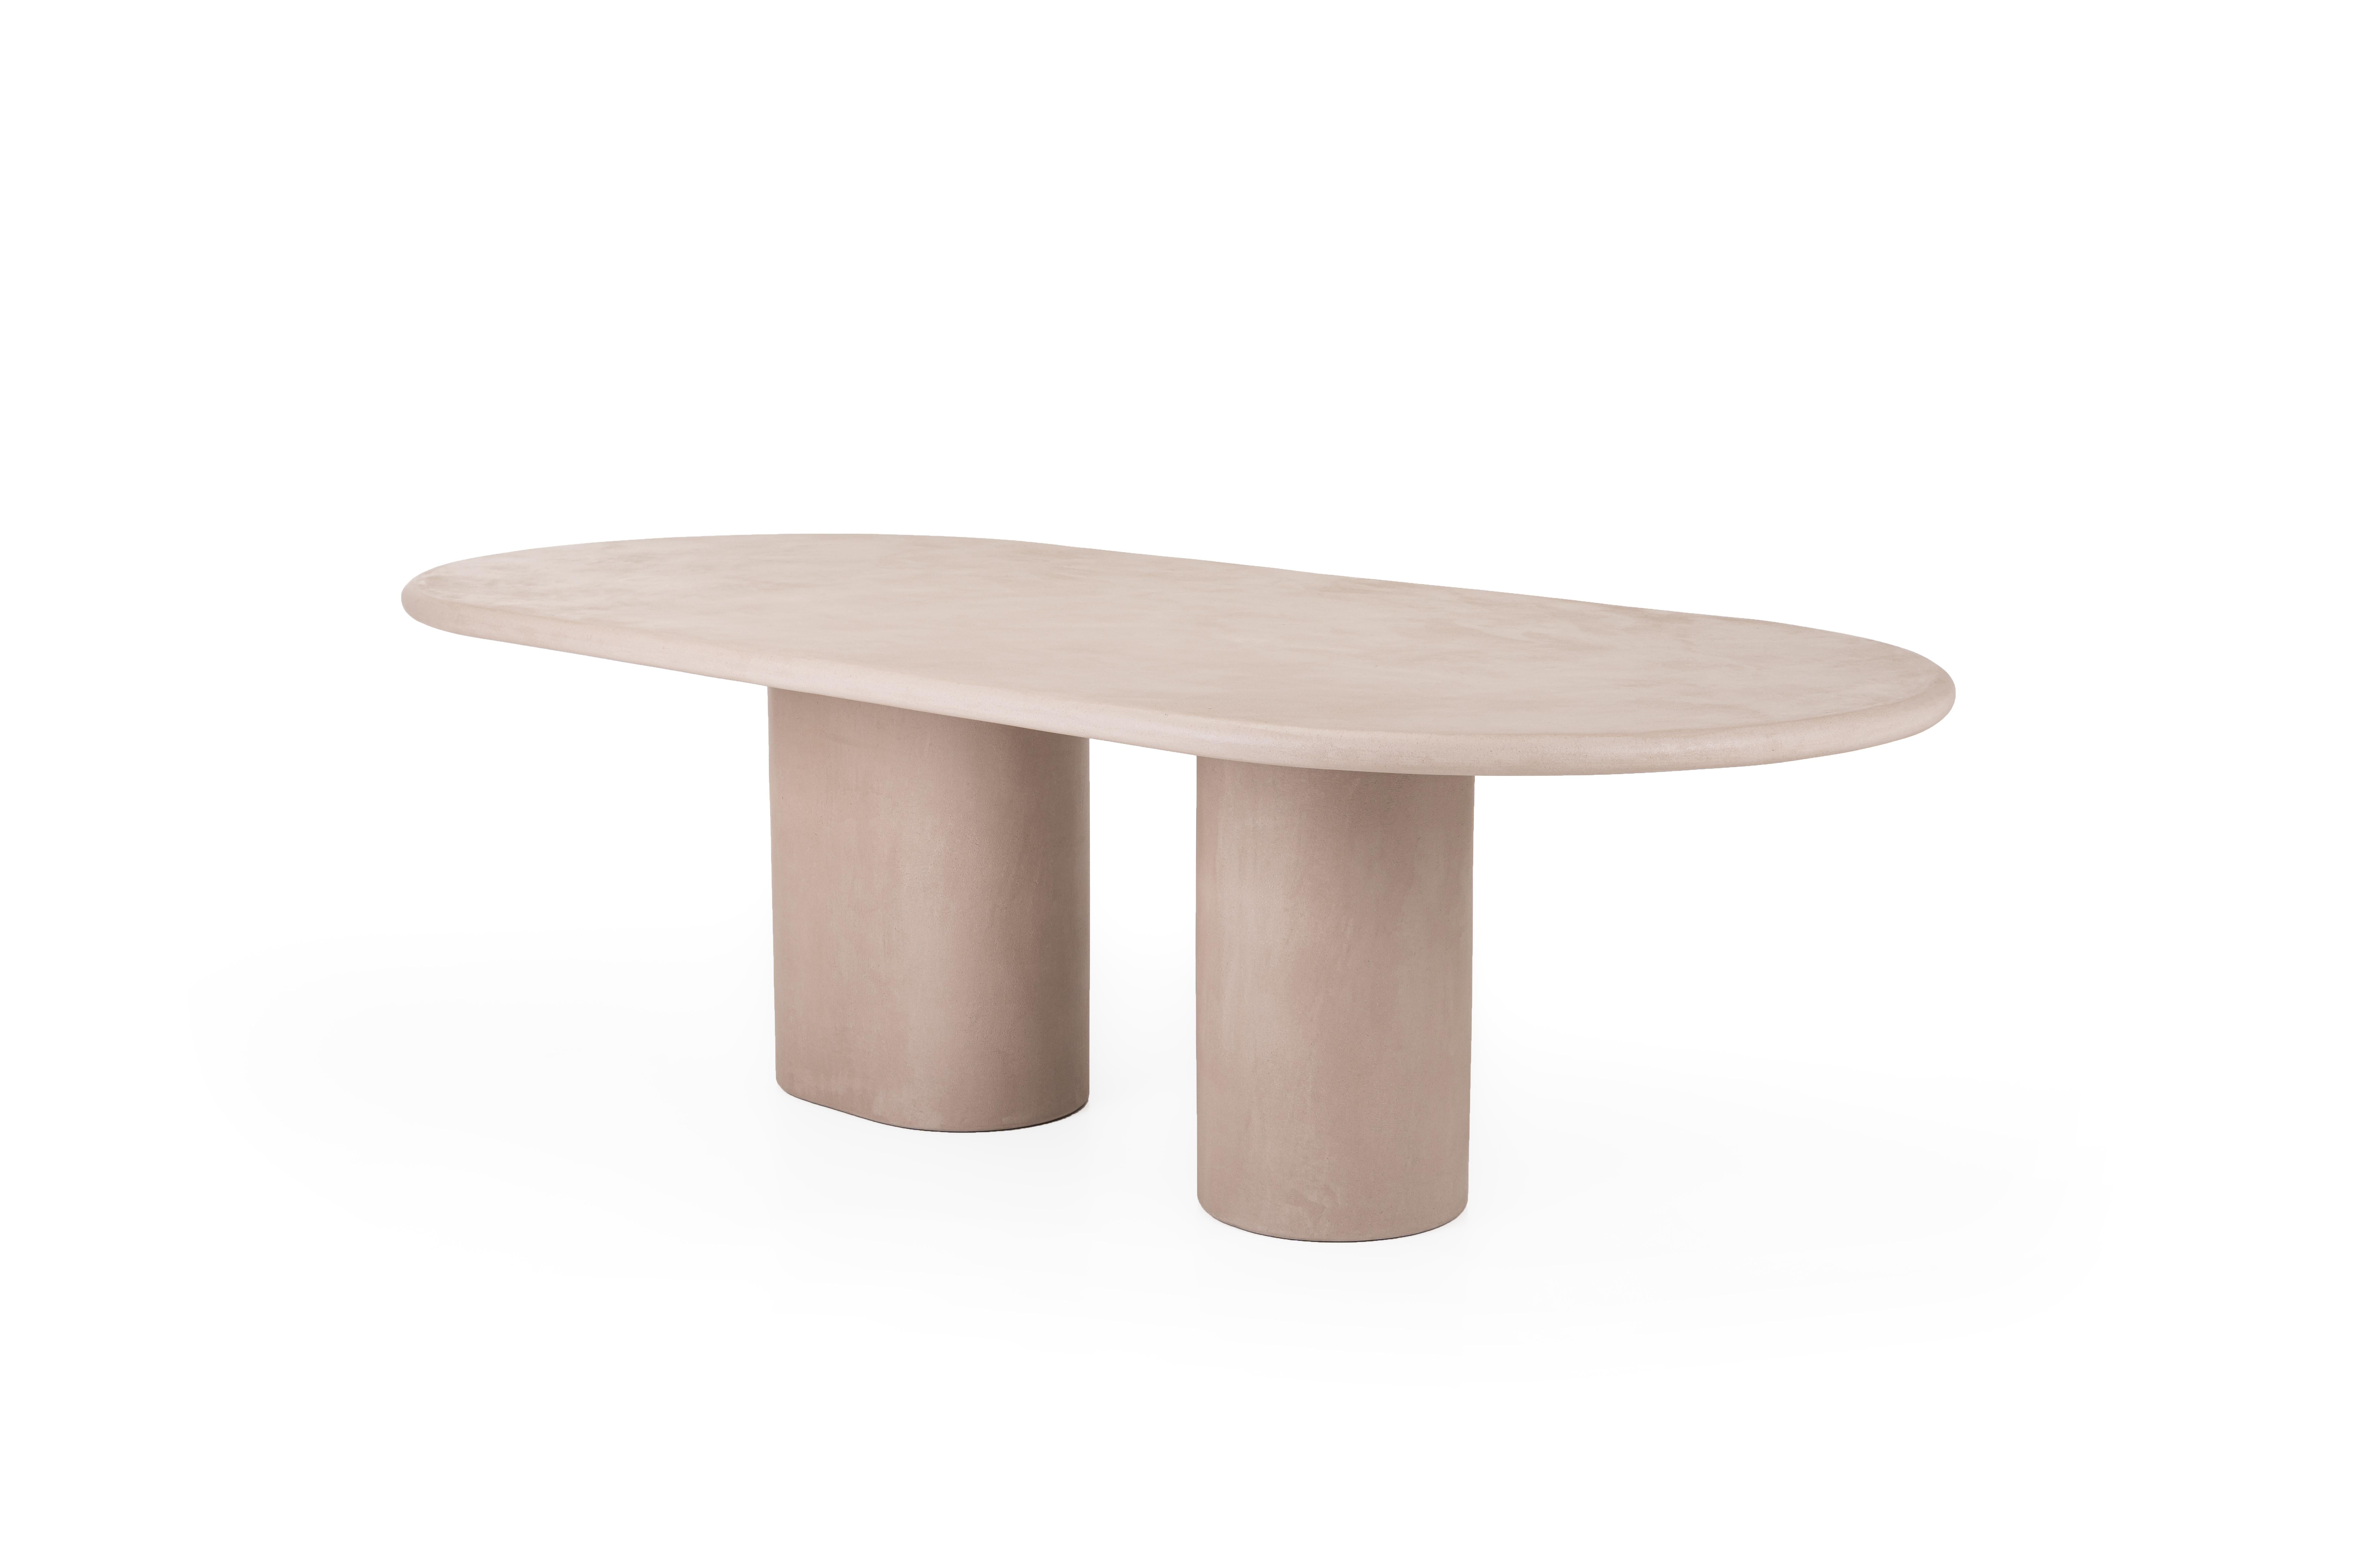 Contemporary Rounded Natural Plaster "Column" Table 320 cm by Isabelle Beaumont